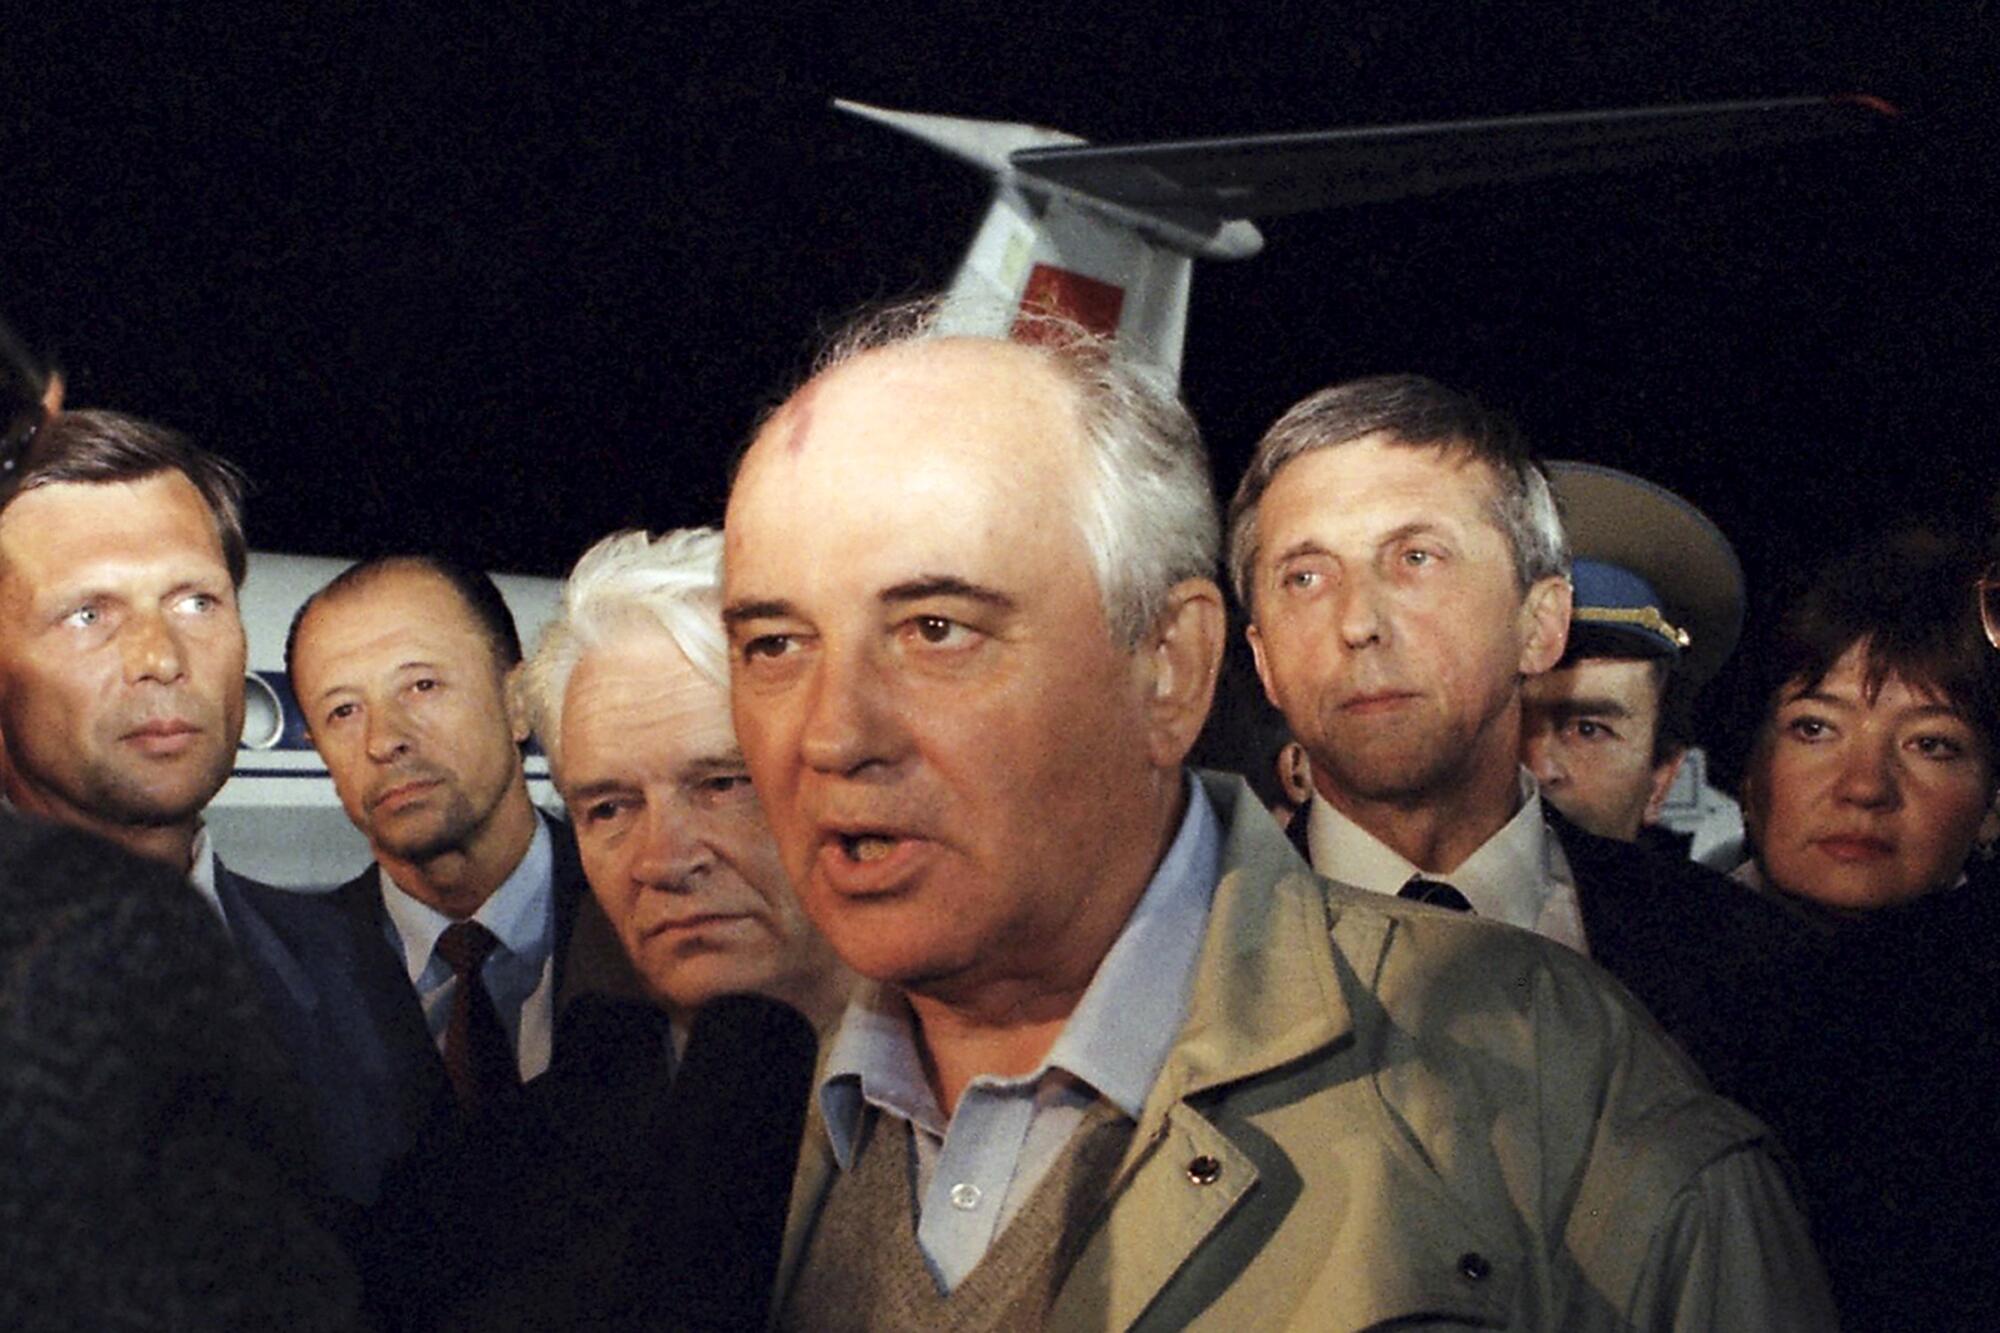 A man in a light blue shirt and khaki jacket speaks as he is surrounded by other people near a plane 